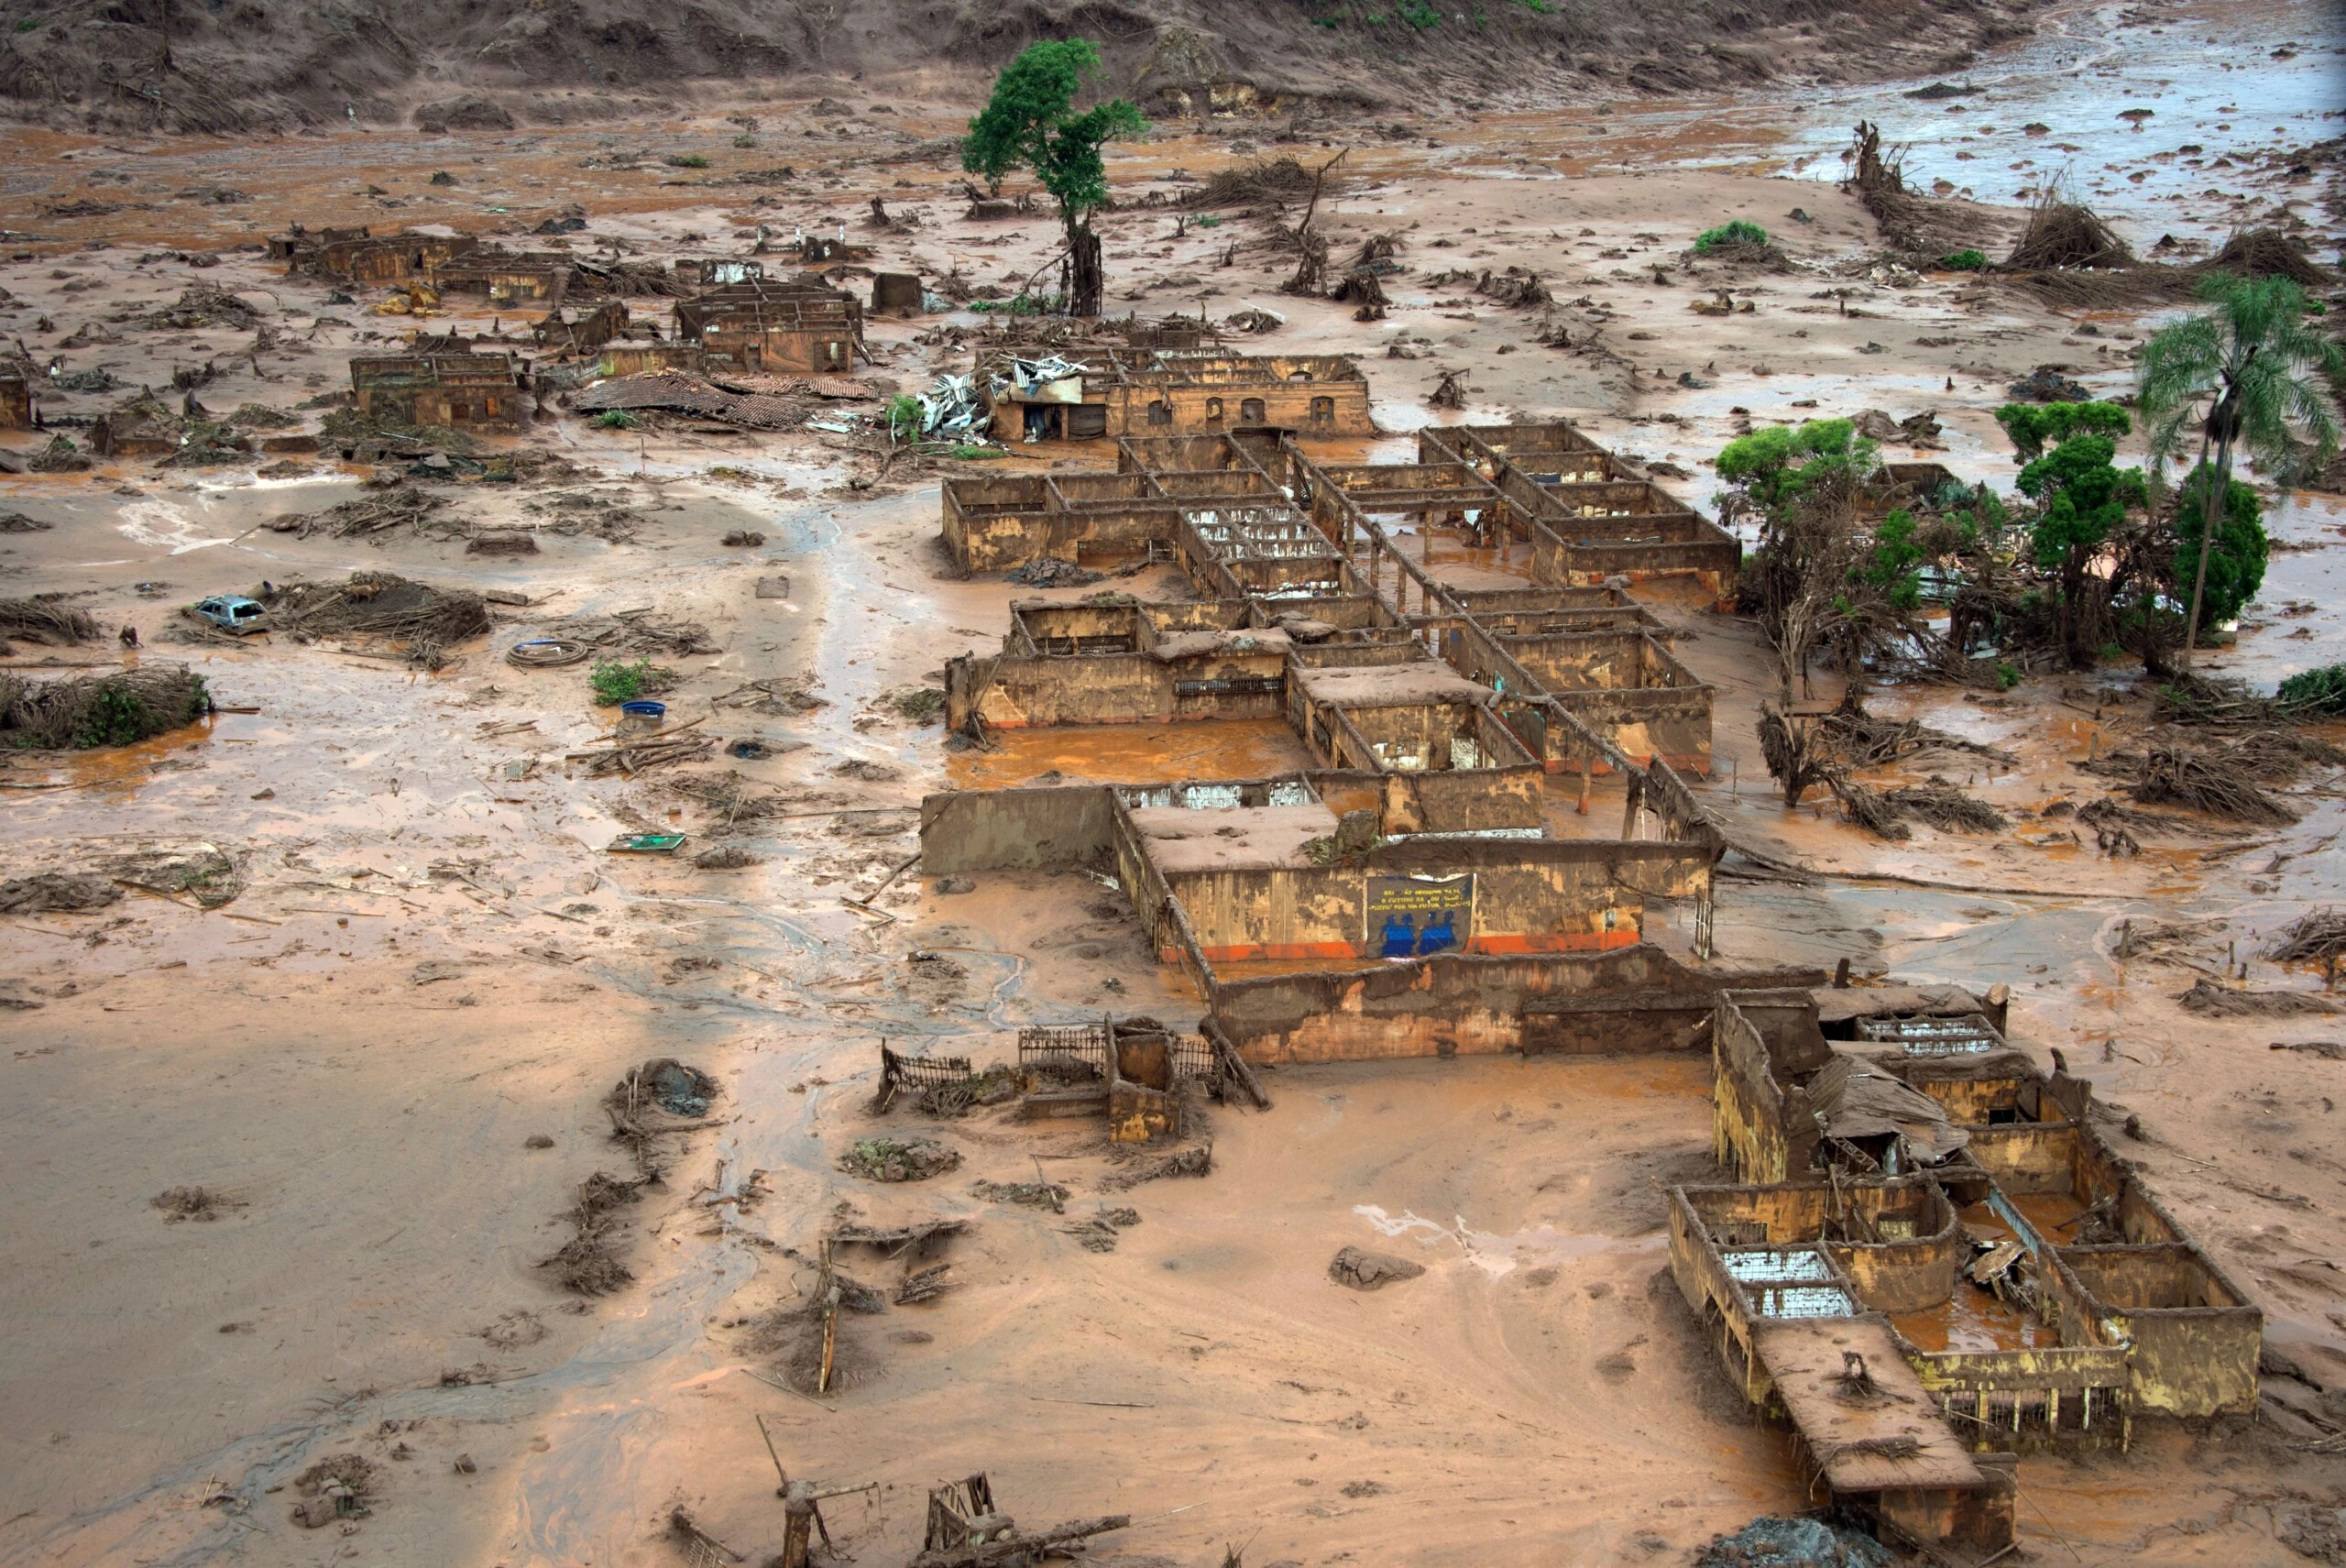 Aerial view of damages after a dam burst in the village of Bento Rodrigues, in Mariana, Minas Gerais state, Brazil on November 6, 2015. A dam burst at a mining waste site unleashing a deluge of thick, red toxic mud that smothered a village killing at least 17 people and injuring some 75. The mining company Samarco, which operates the site, is jointly owned by two mining giants, Vale of Brazil and BHP Billiton of Australia. AFP PHOTO /  CHRISTOPHE SIMON        (Photo credit should read CHRISTOPHE SIMON/AFP/Getty Images)